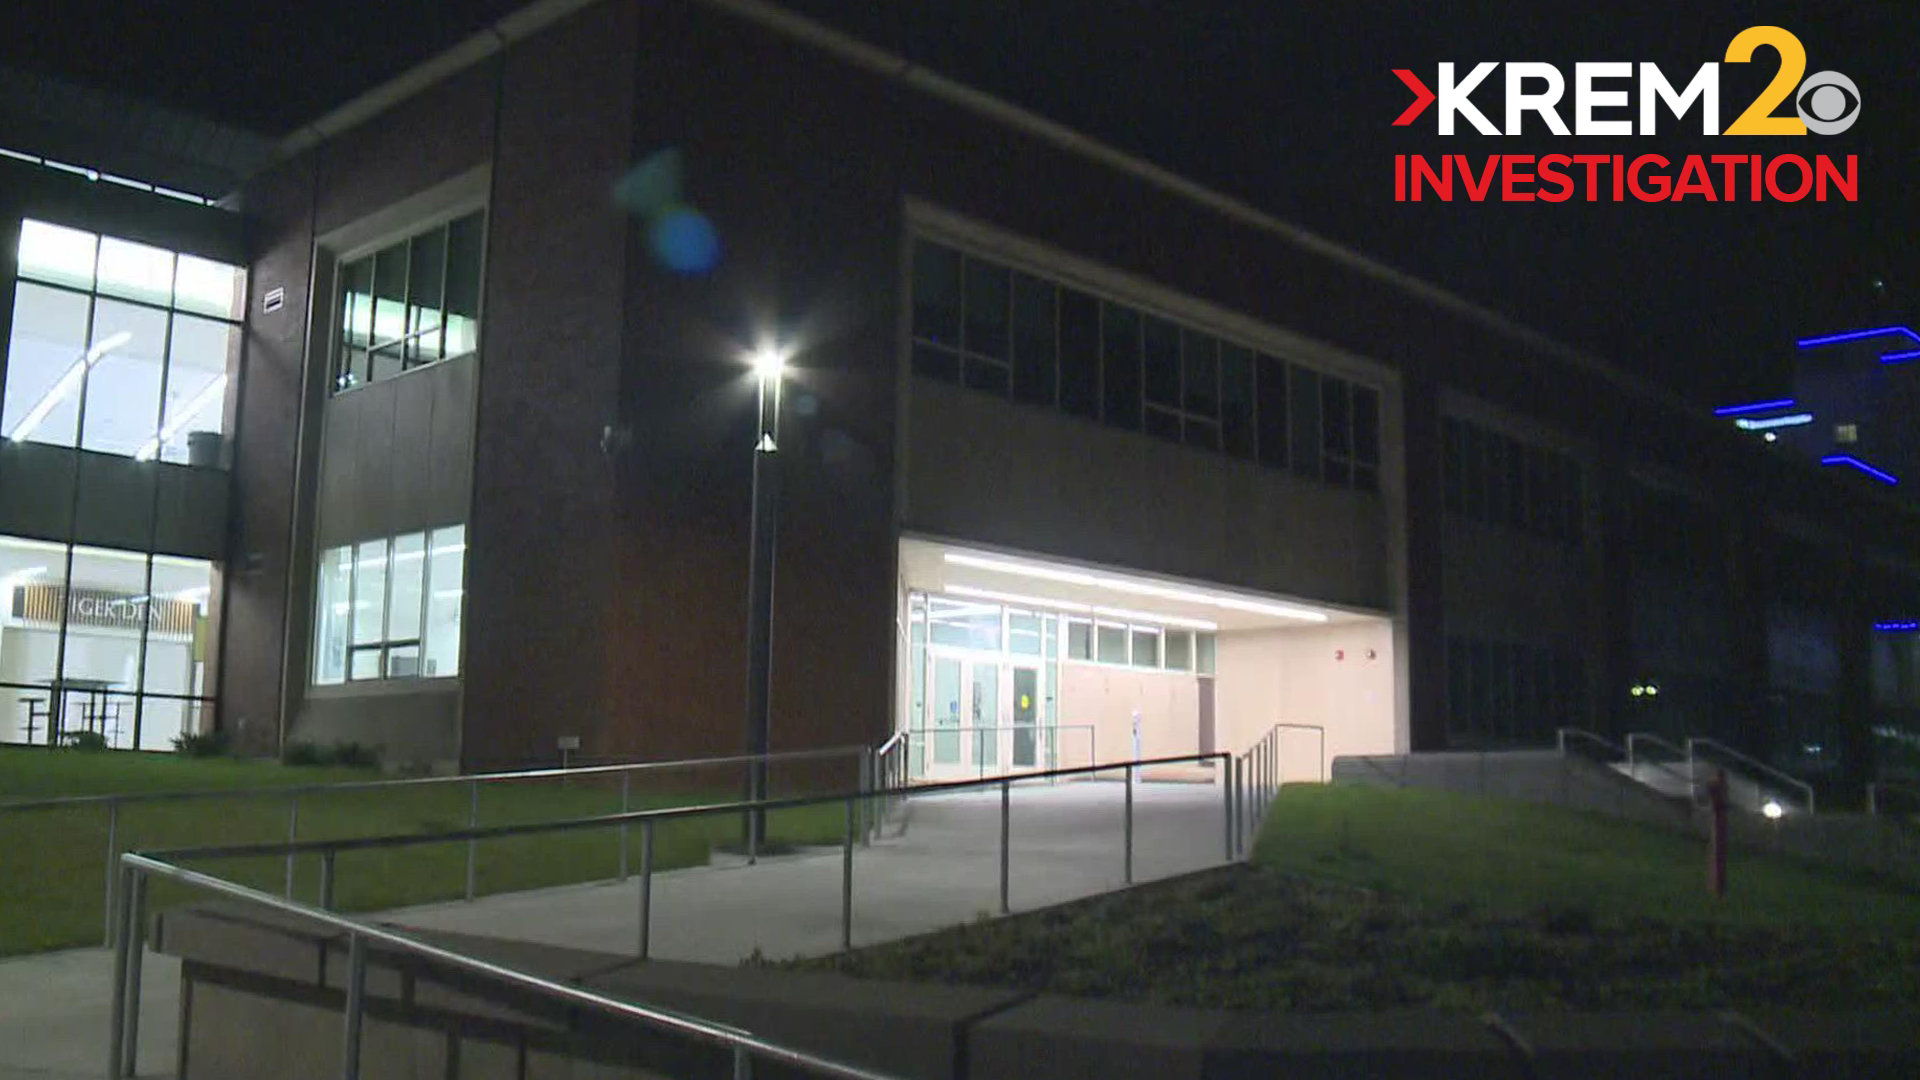 A Lewis and Clark staff member spoke to KREM 2 anonymously and described the scene as "something out of a movie."